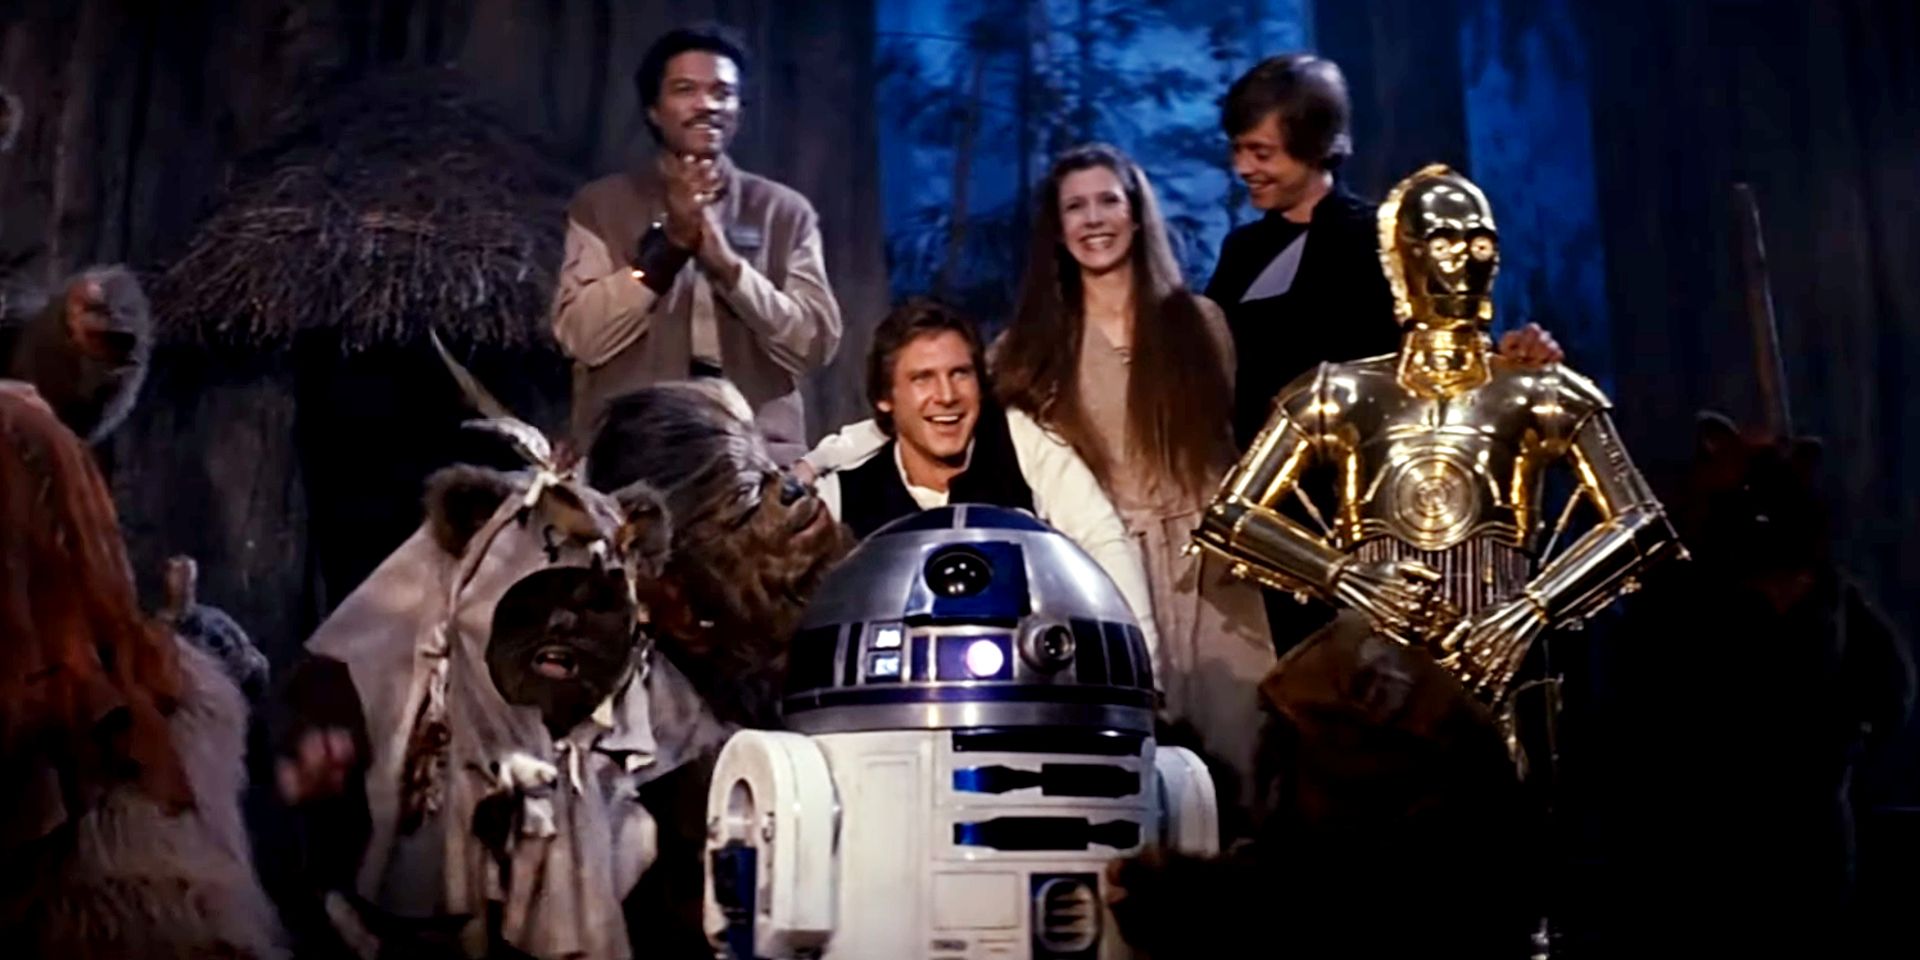 Lando, Han, R2, Leia, Luke, Chewbacca, and the Ewoks celebrate their victory at the end of Return of the Jedi